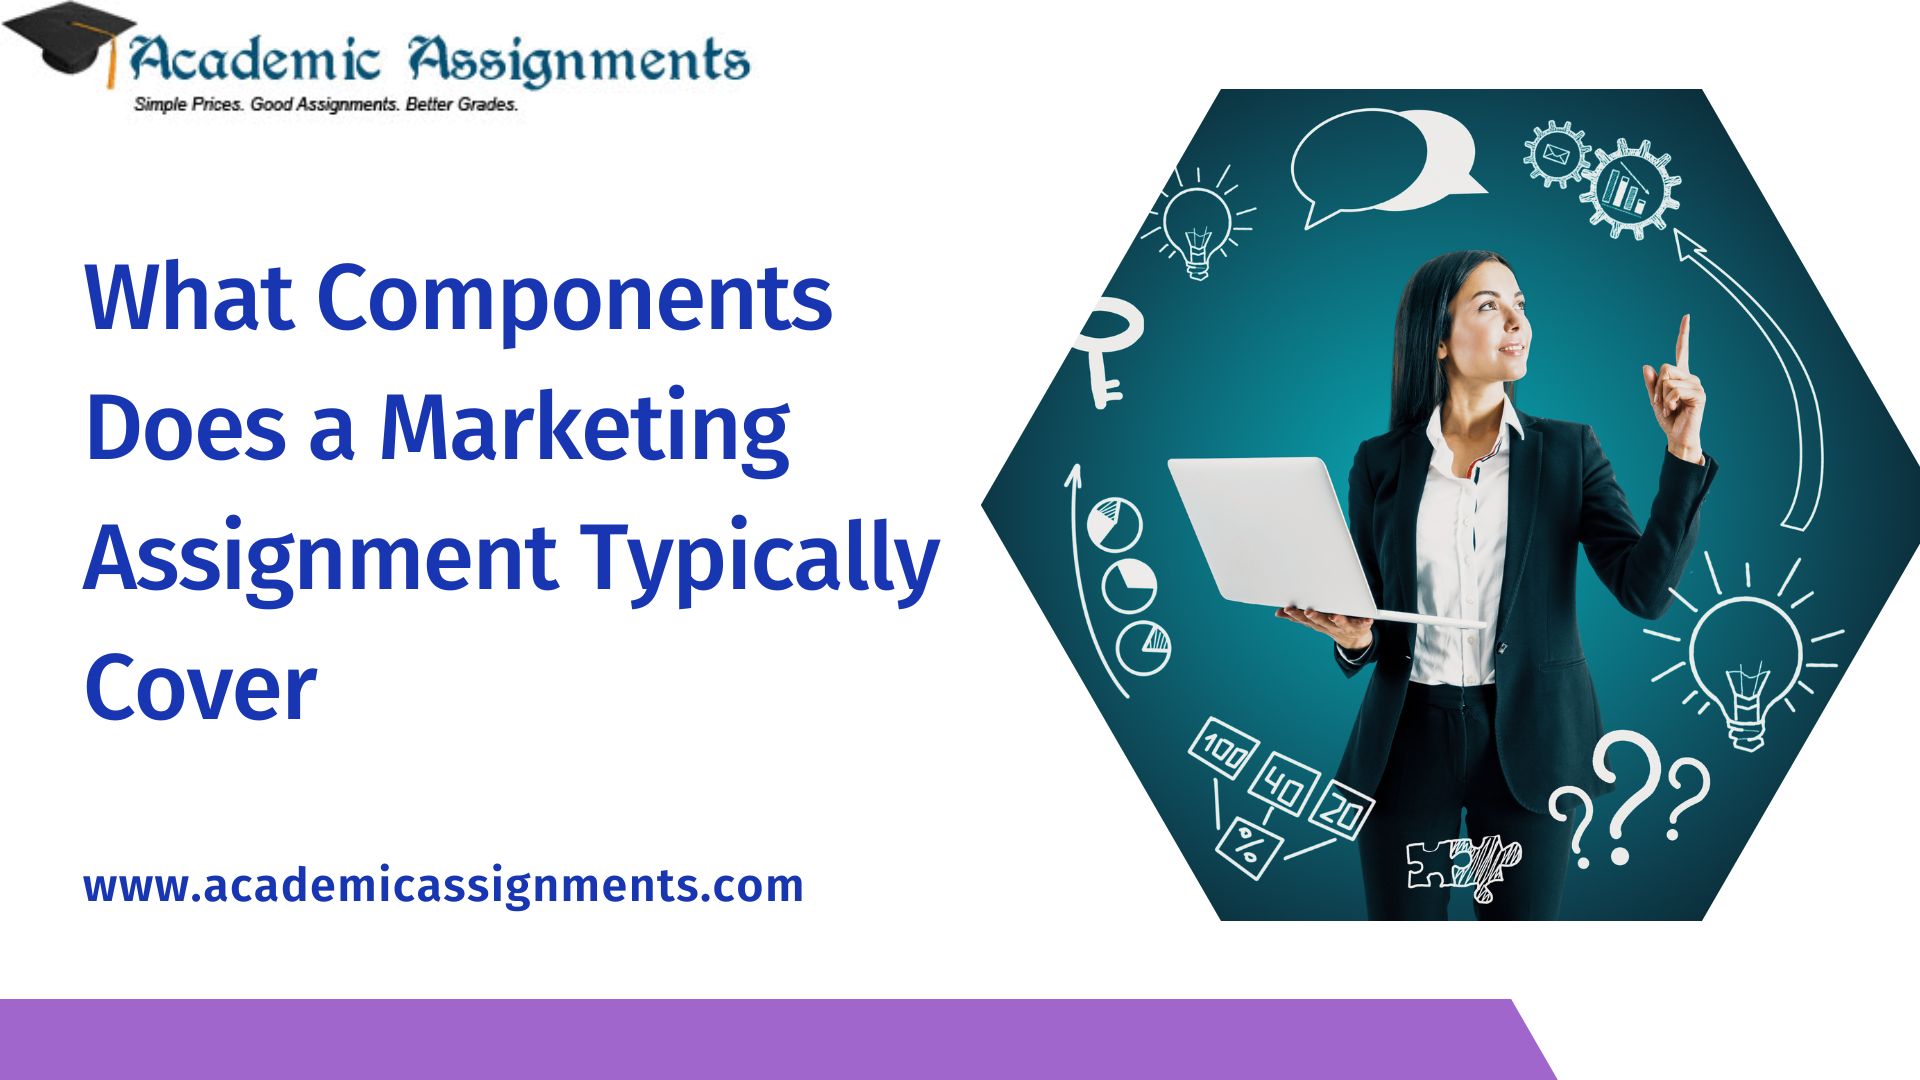 What Components Does a Marketing Assignment Typically Cover